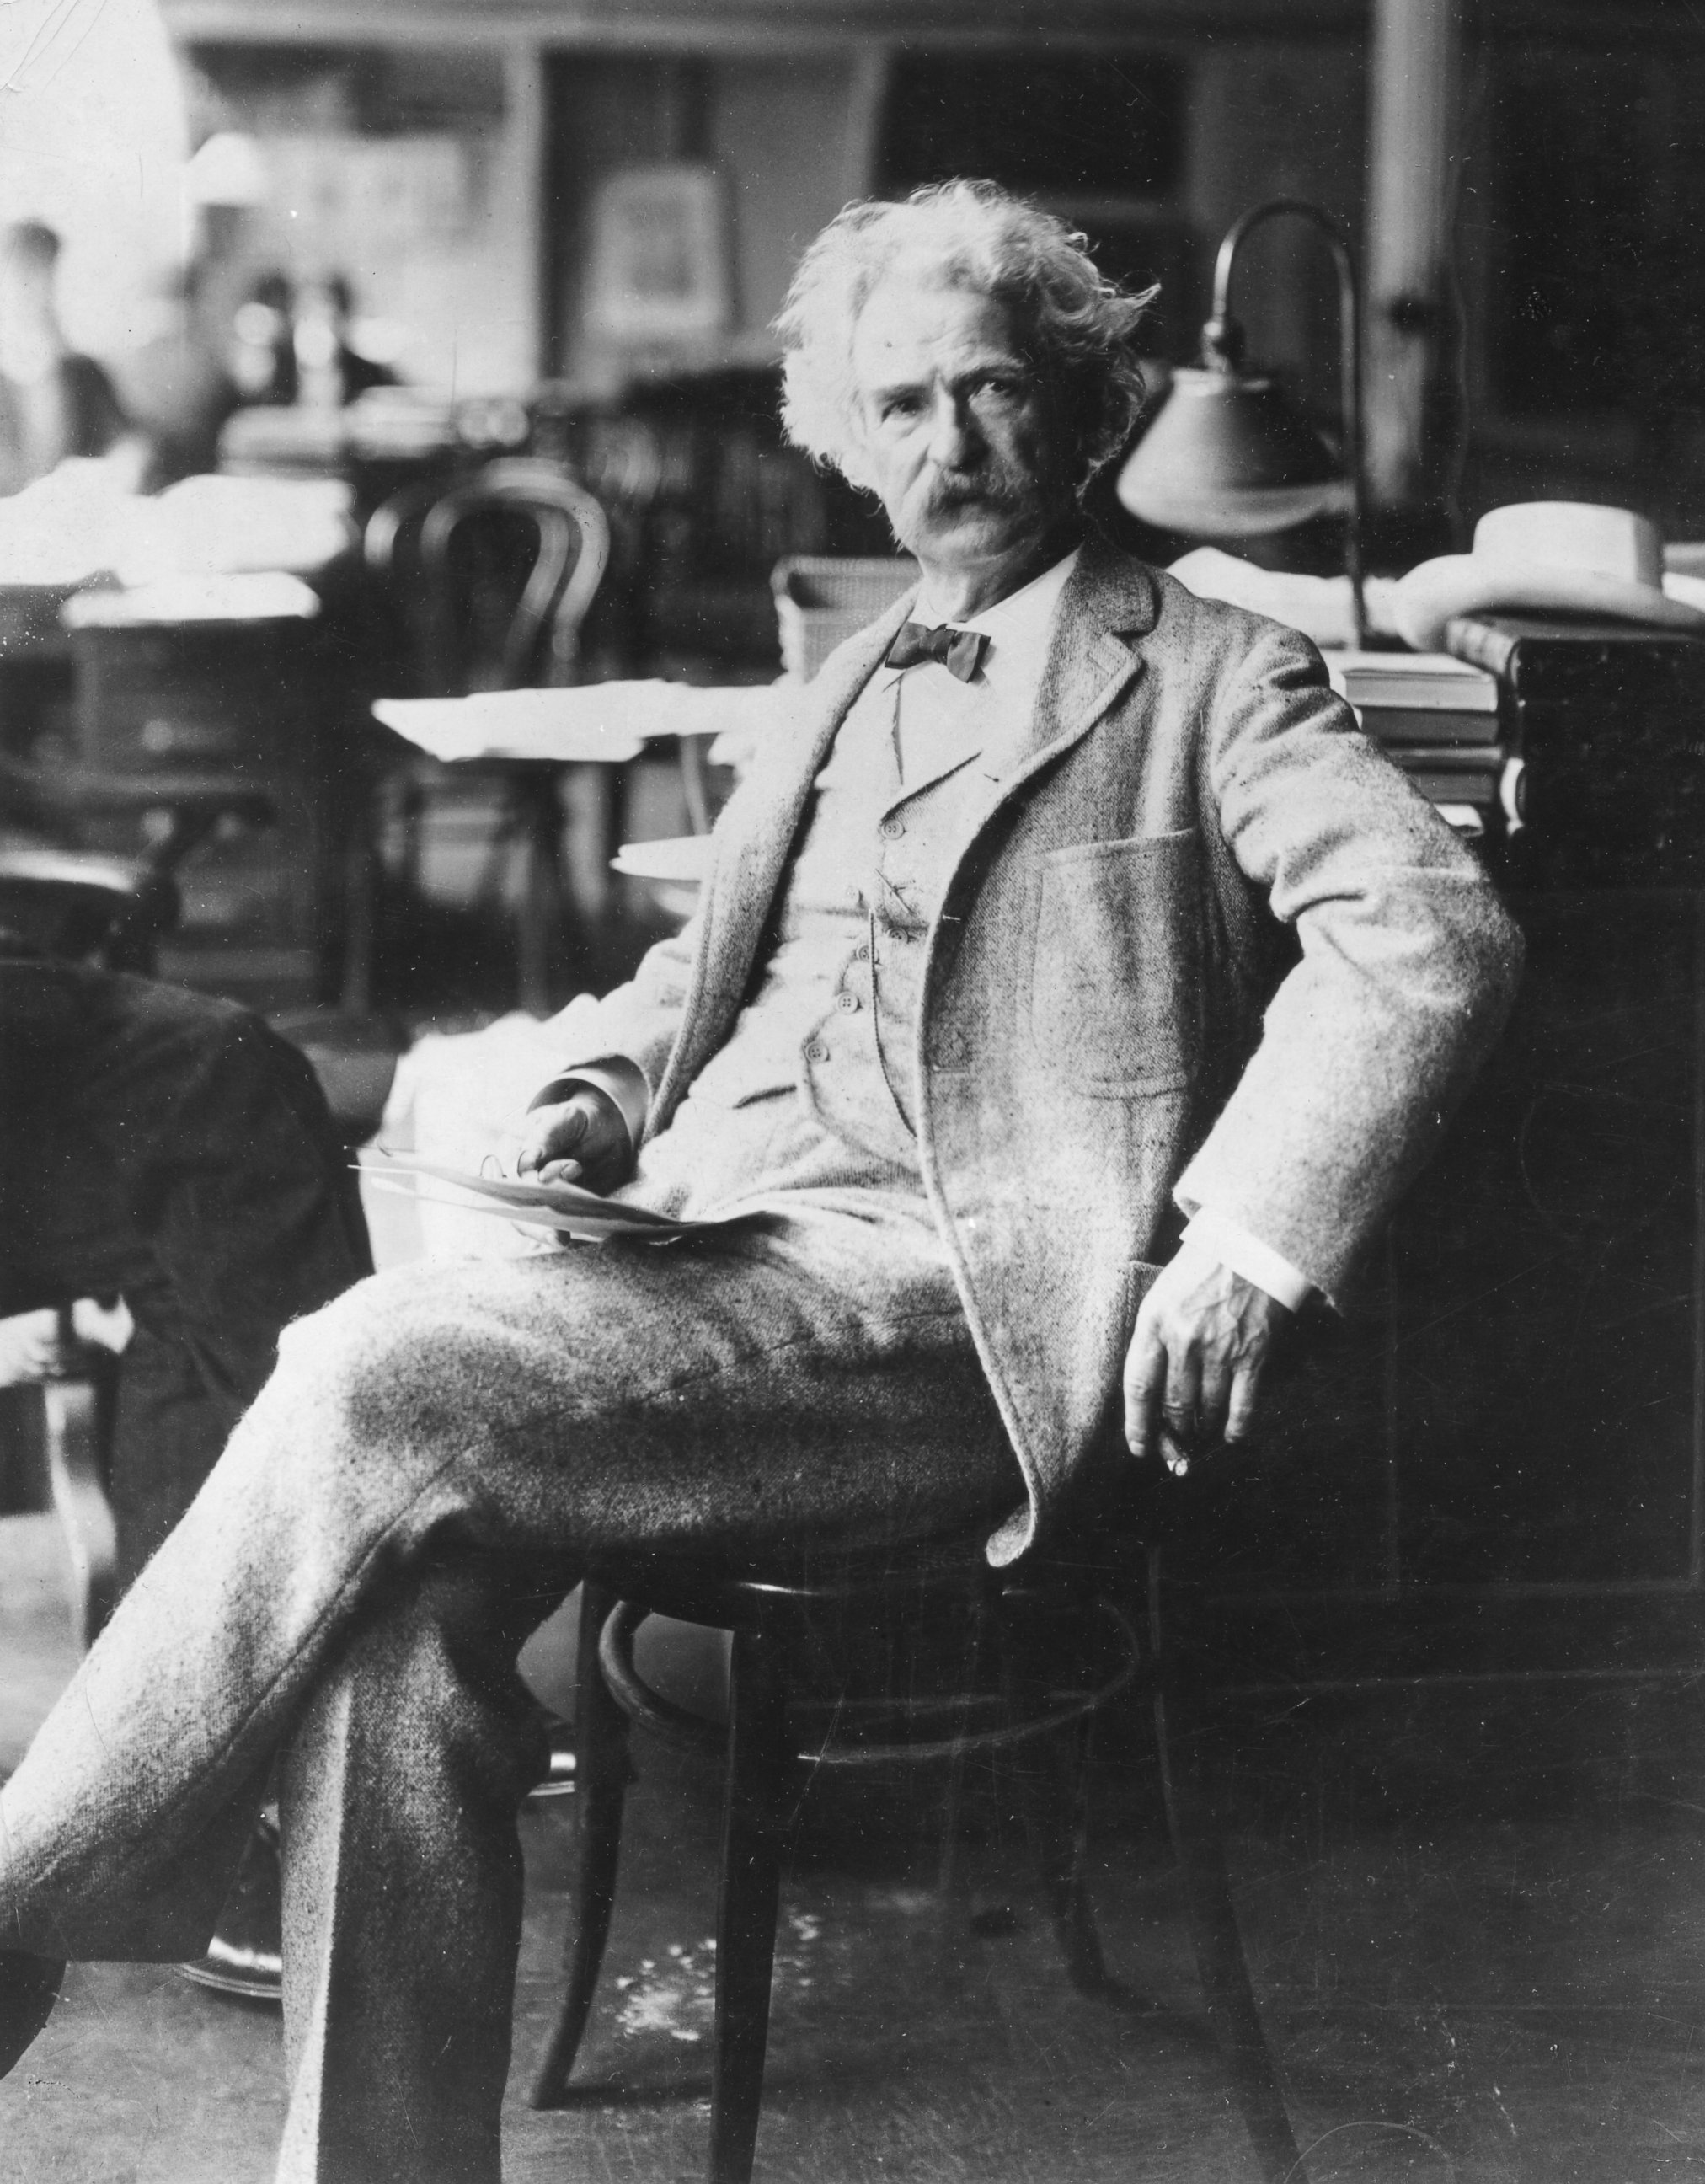 PHOTO: Portrait of American author Samuel Clemens, better known as Mark Twain, as he sits in a chair, late 19th century.